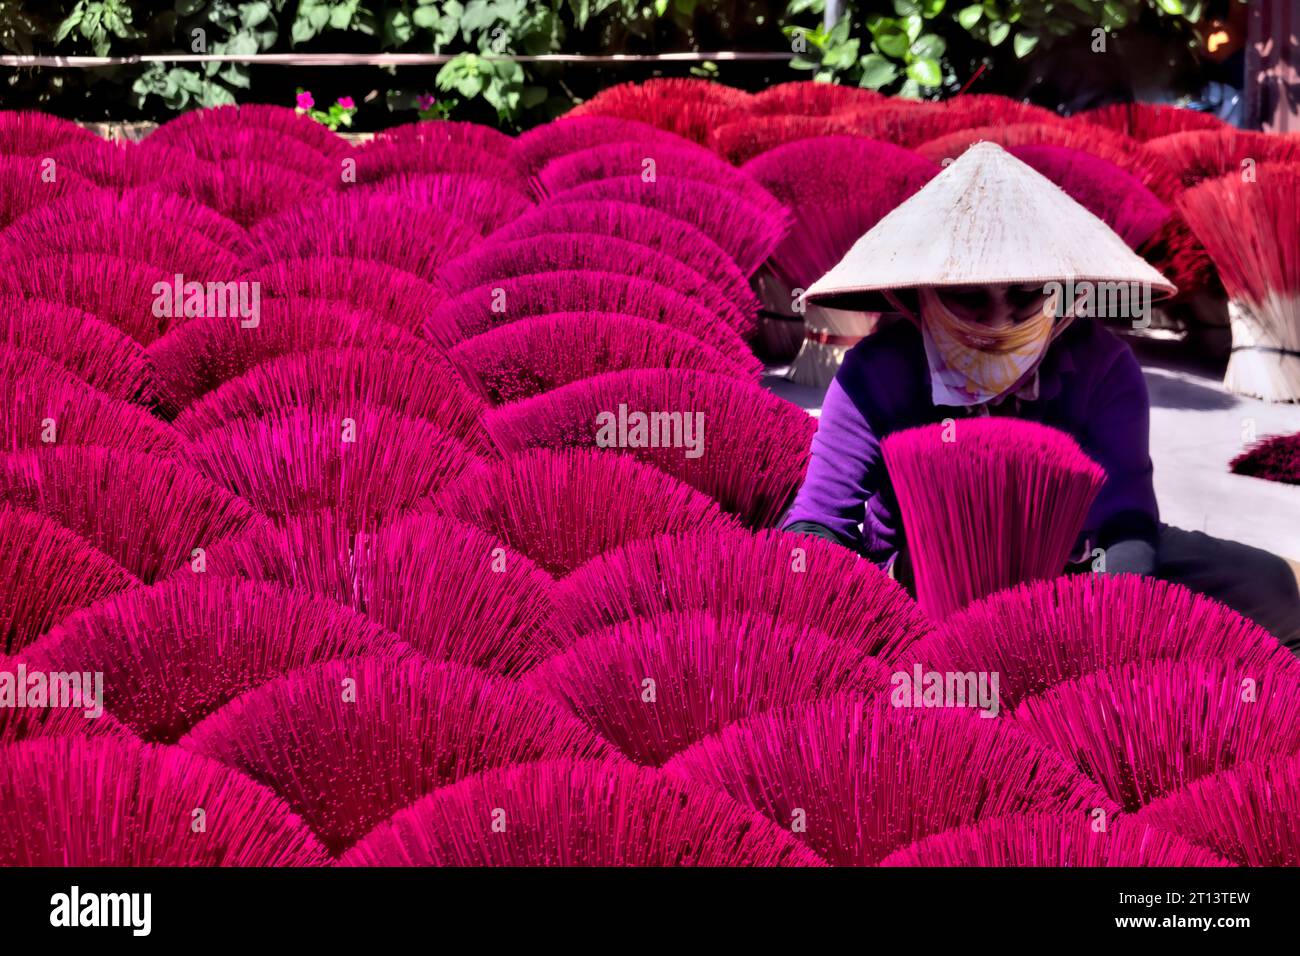 Worker drying incense in the Quang Phu Cau incense village, Hanoi, Vietnam Stock Photo